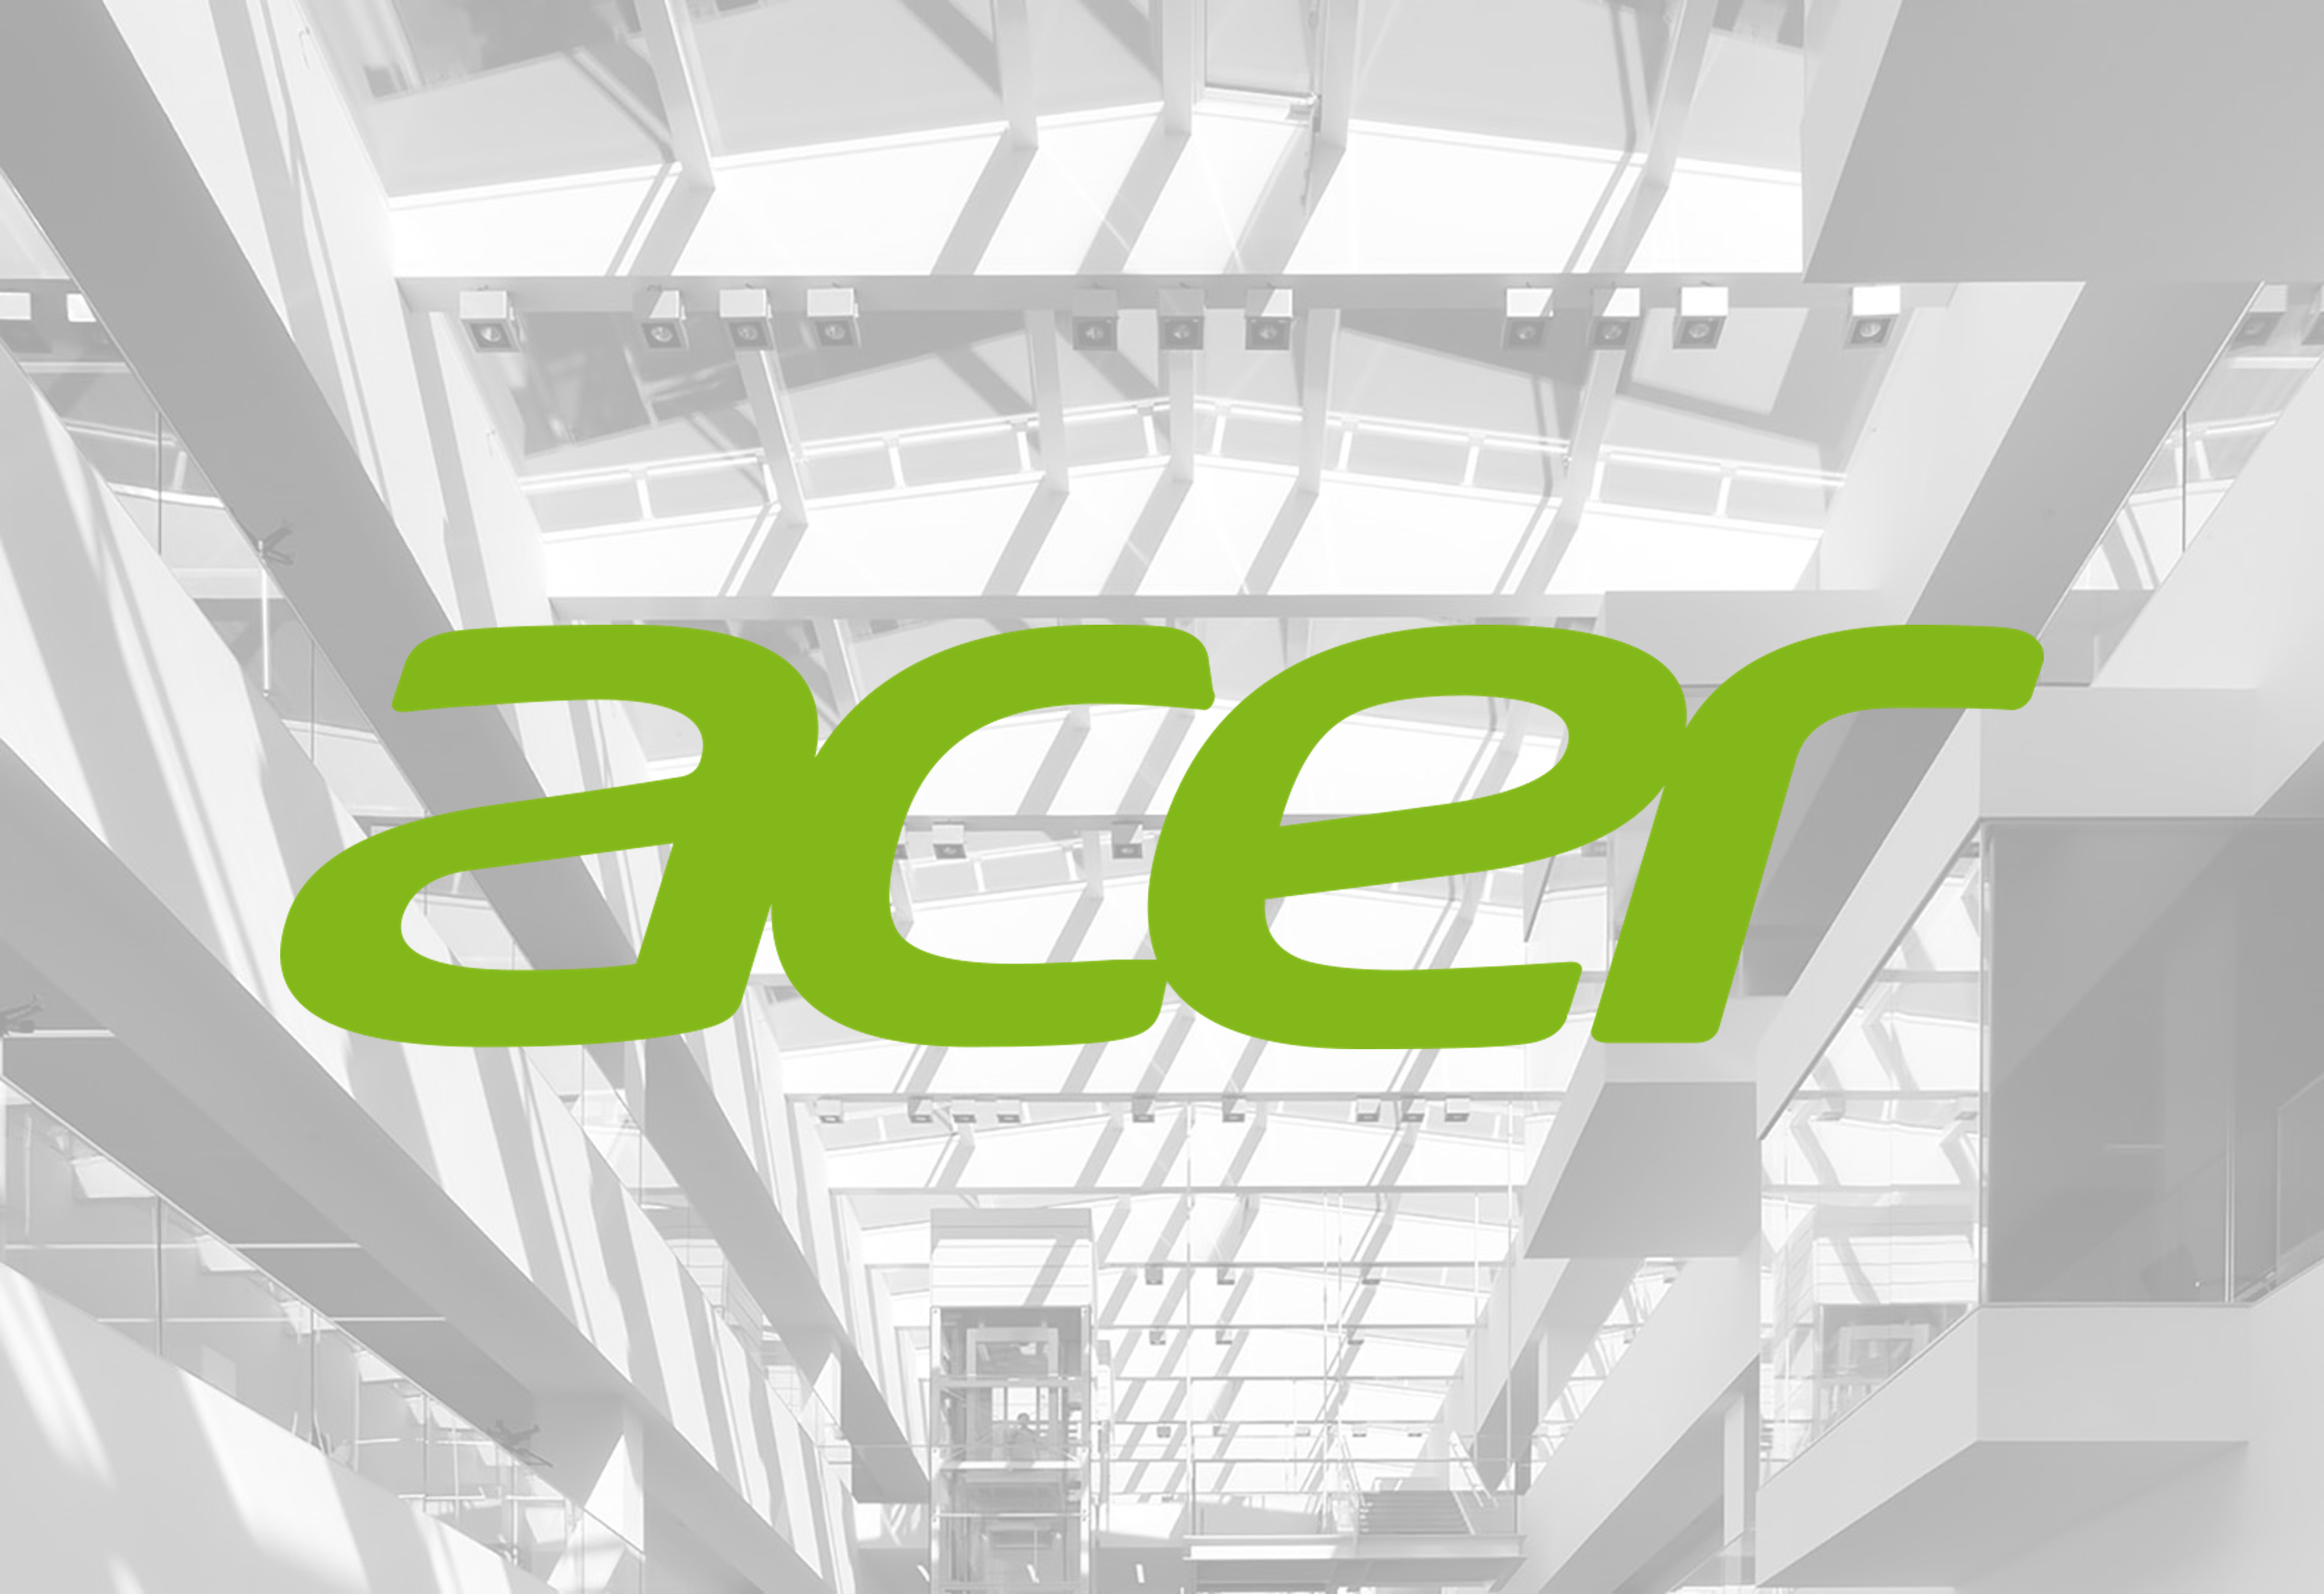 My first weeks at Acer Europe